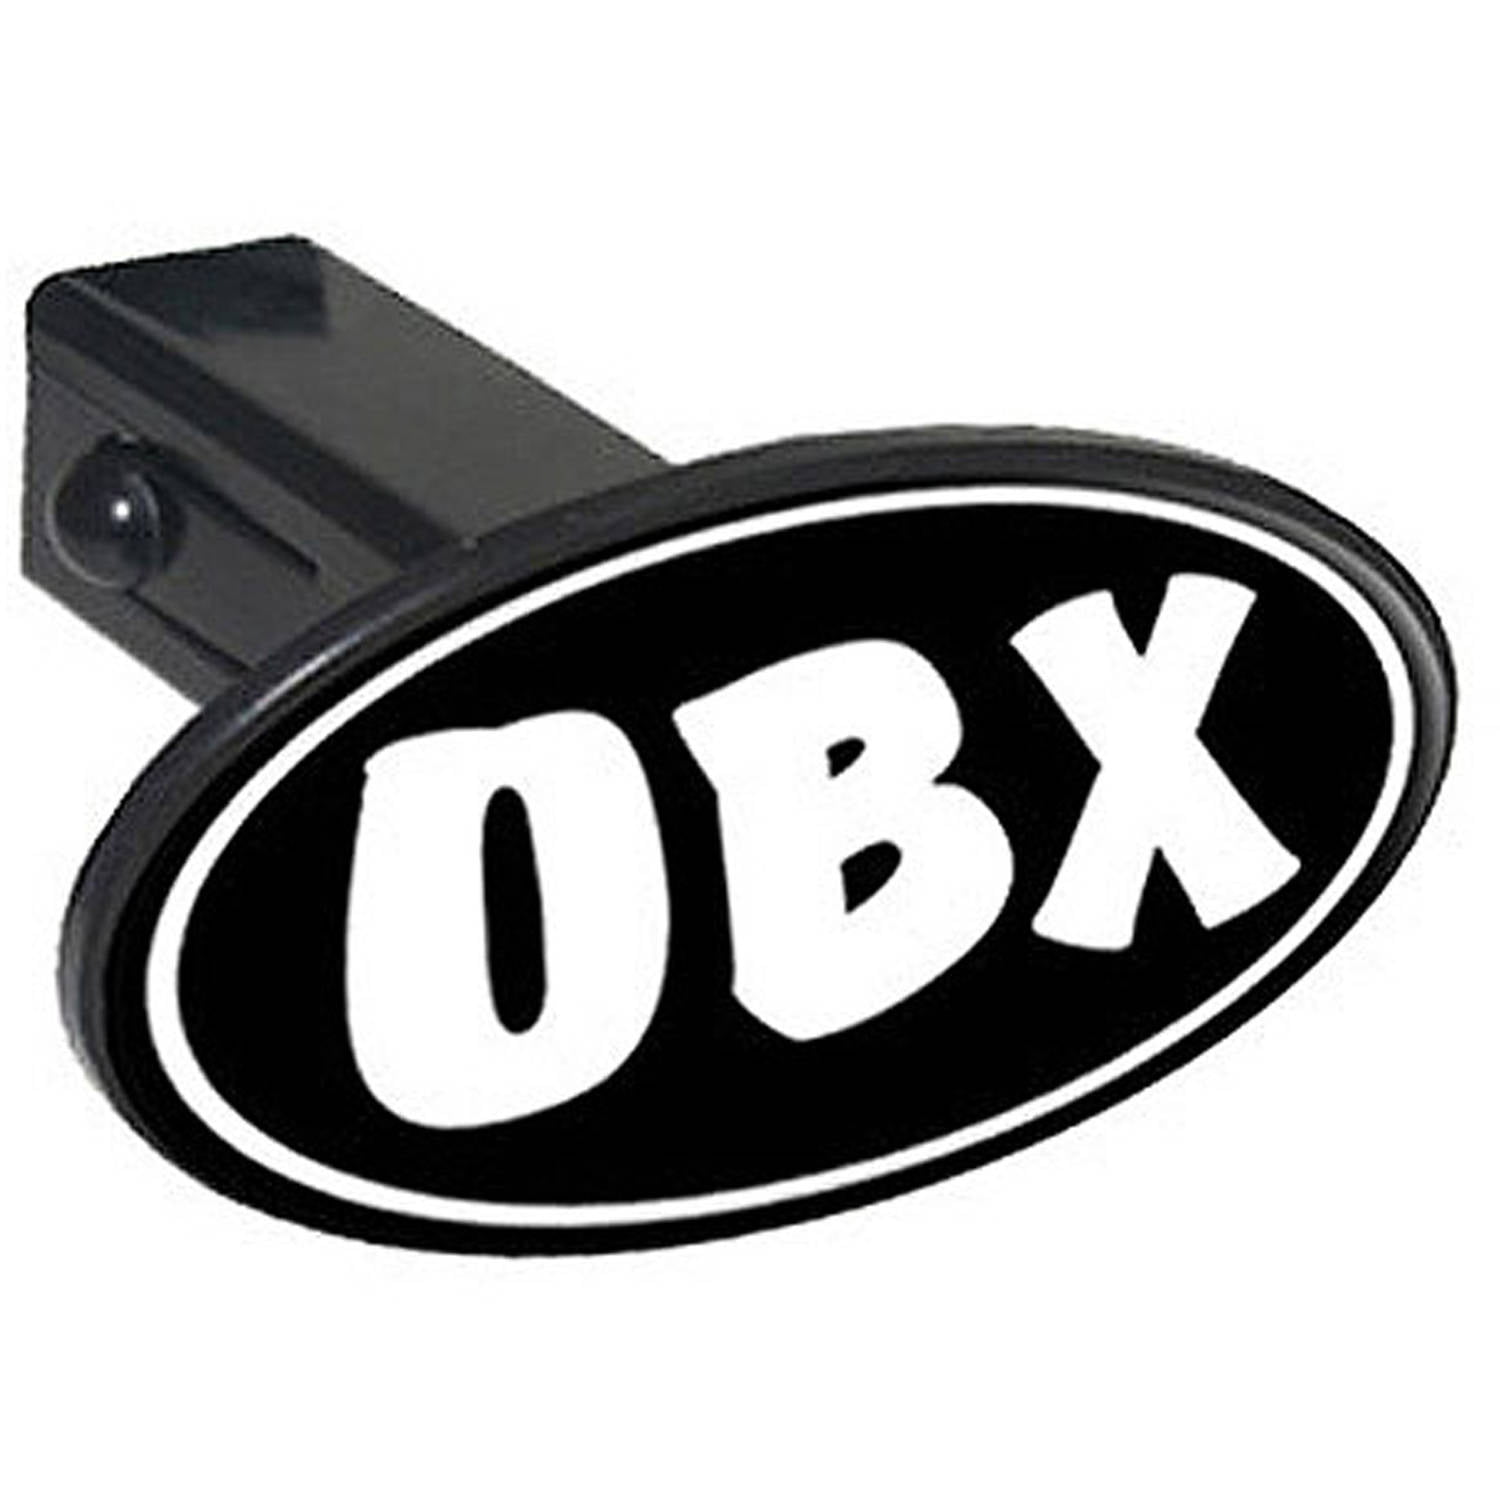 Outer Banks NC Rubber Trailer Hitch Cover 